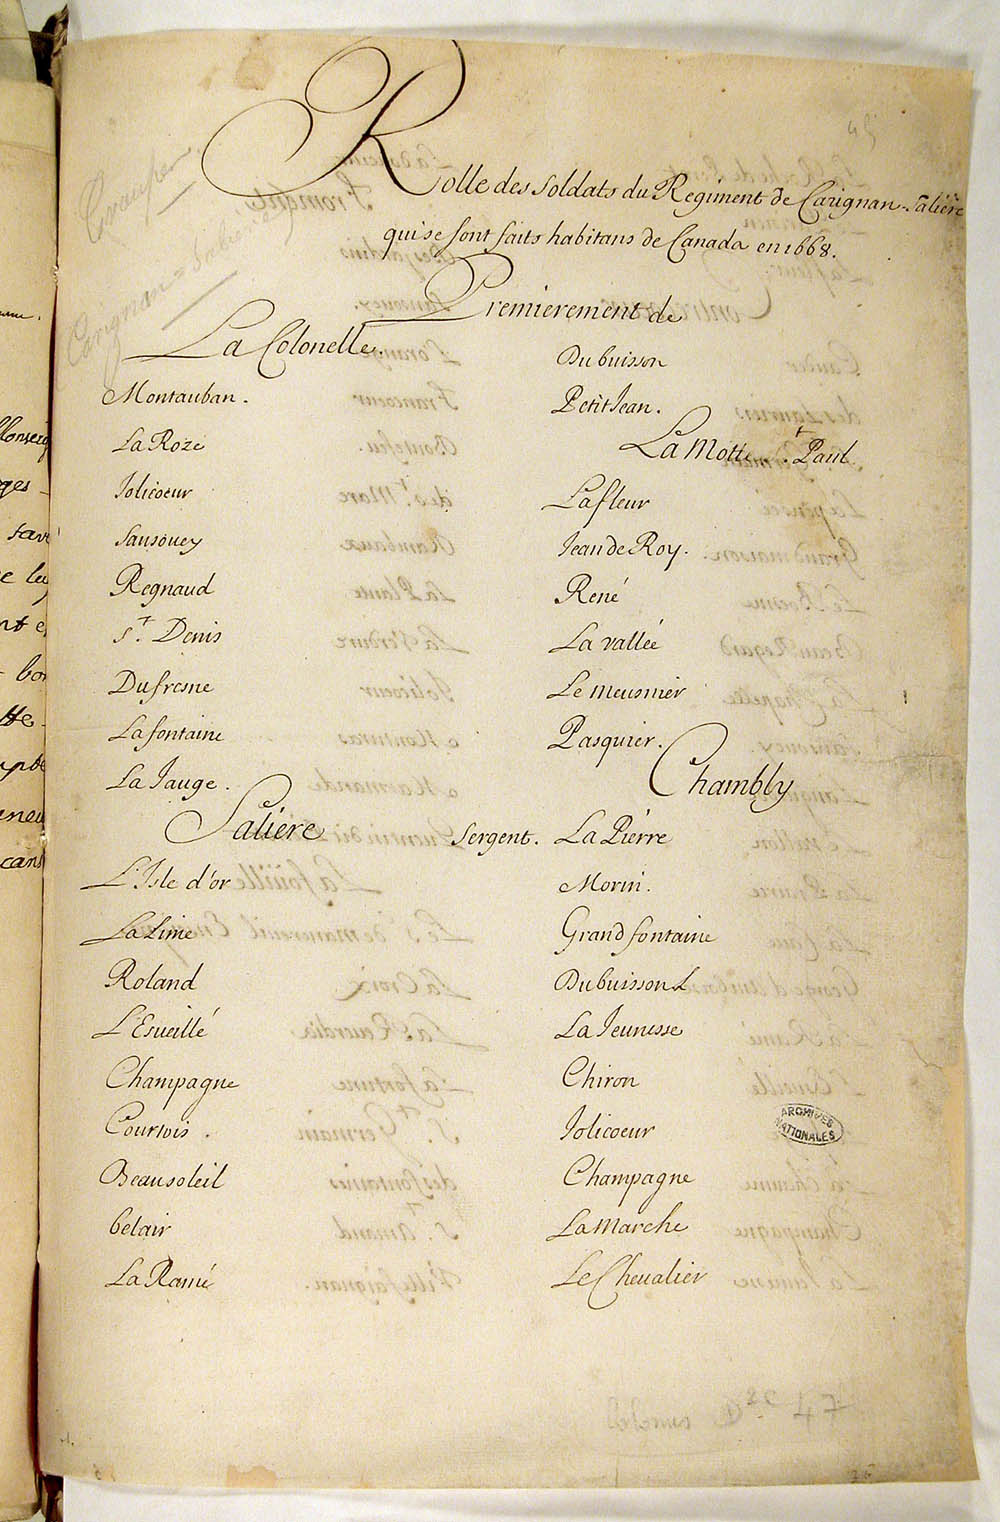 [Roll of soldiers of the Carignan-Salières Regiment living in Canada in 1668]. FR CAOM COL D2C 47 fol. 45-49vo